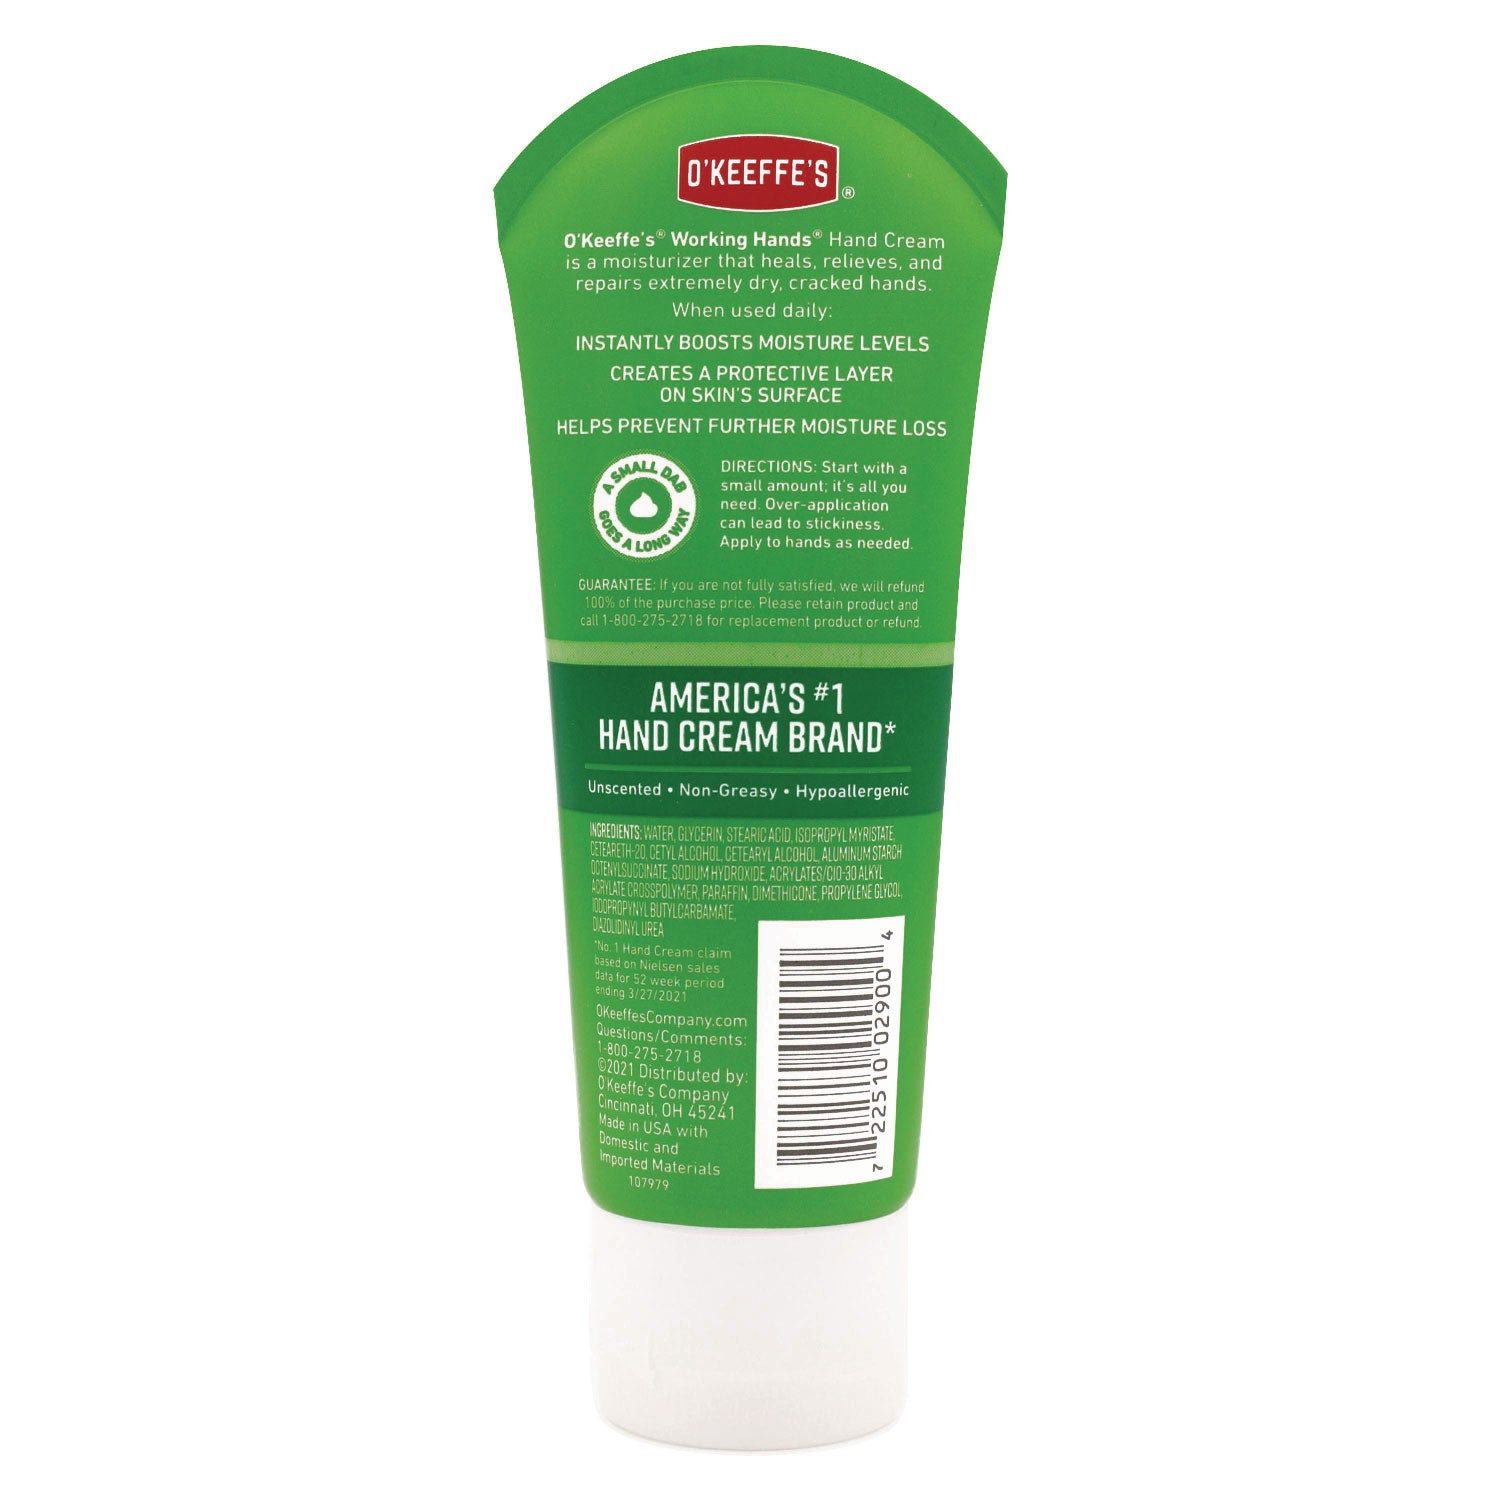 O'Keeffe's Working Hands Hand Cream - Cream - 3 fl oz - For Dry Skin - Applicable on Hand - Cracked/Scaly Skin - Moisturising, Hypoallergenic - 1 Each - 2